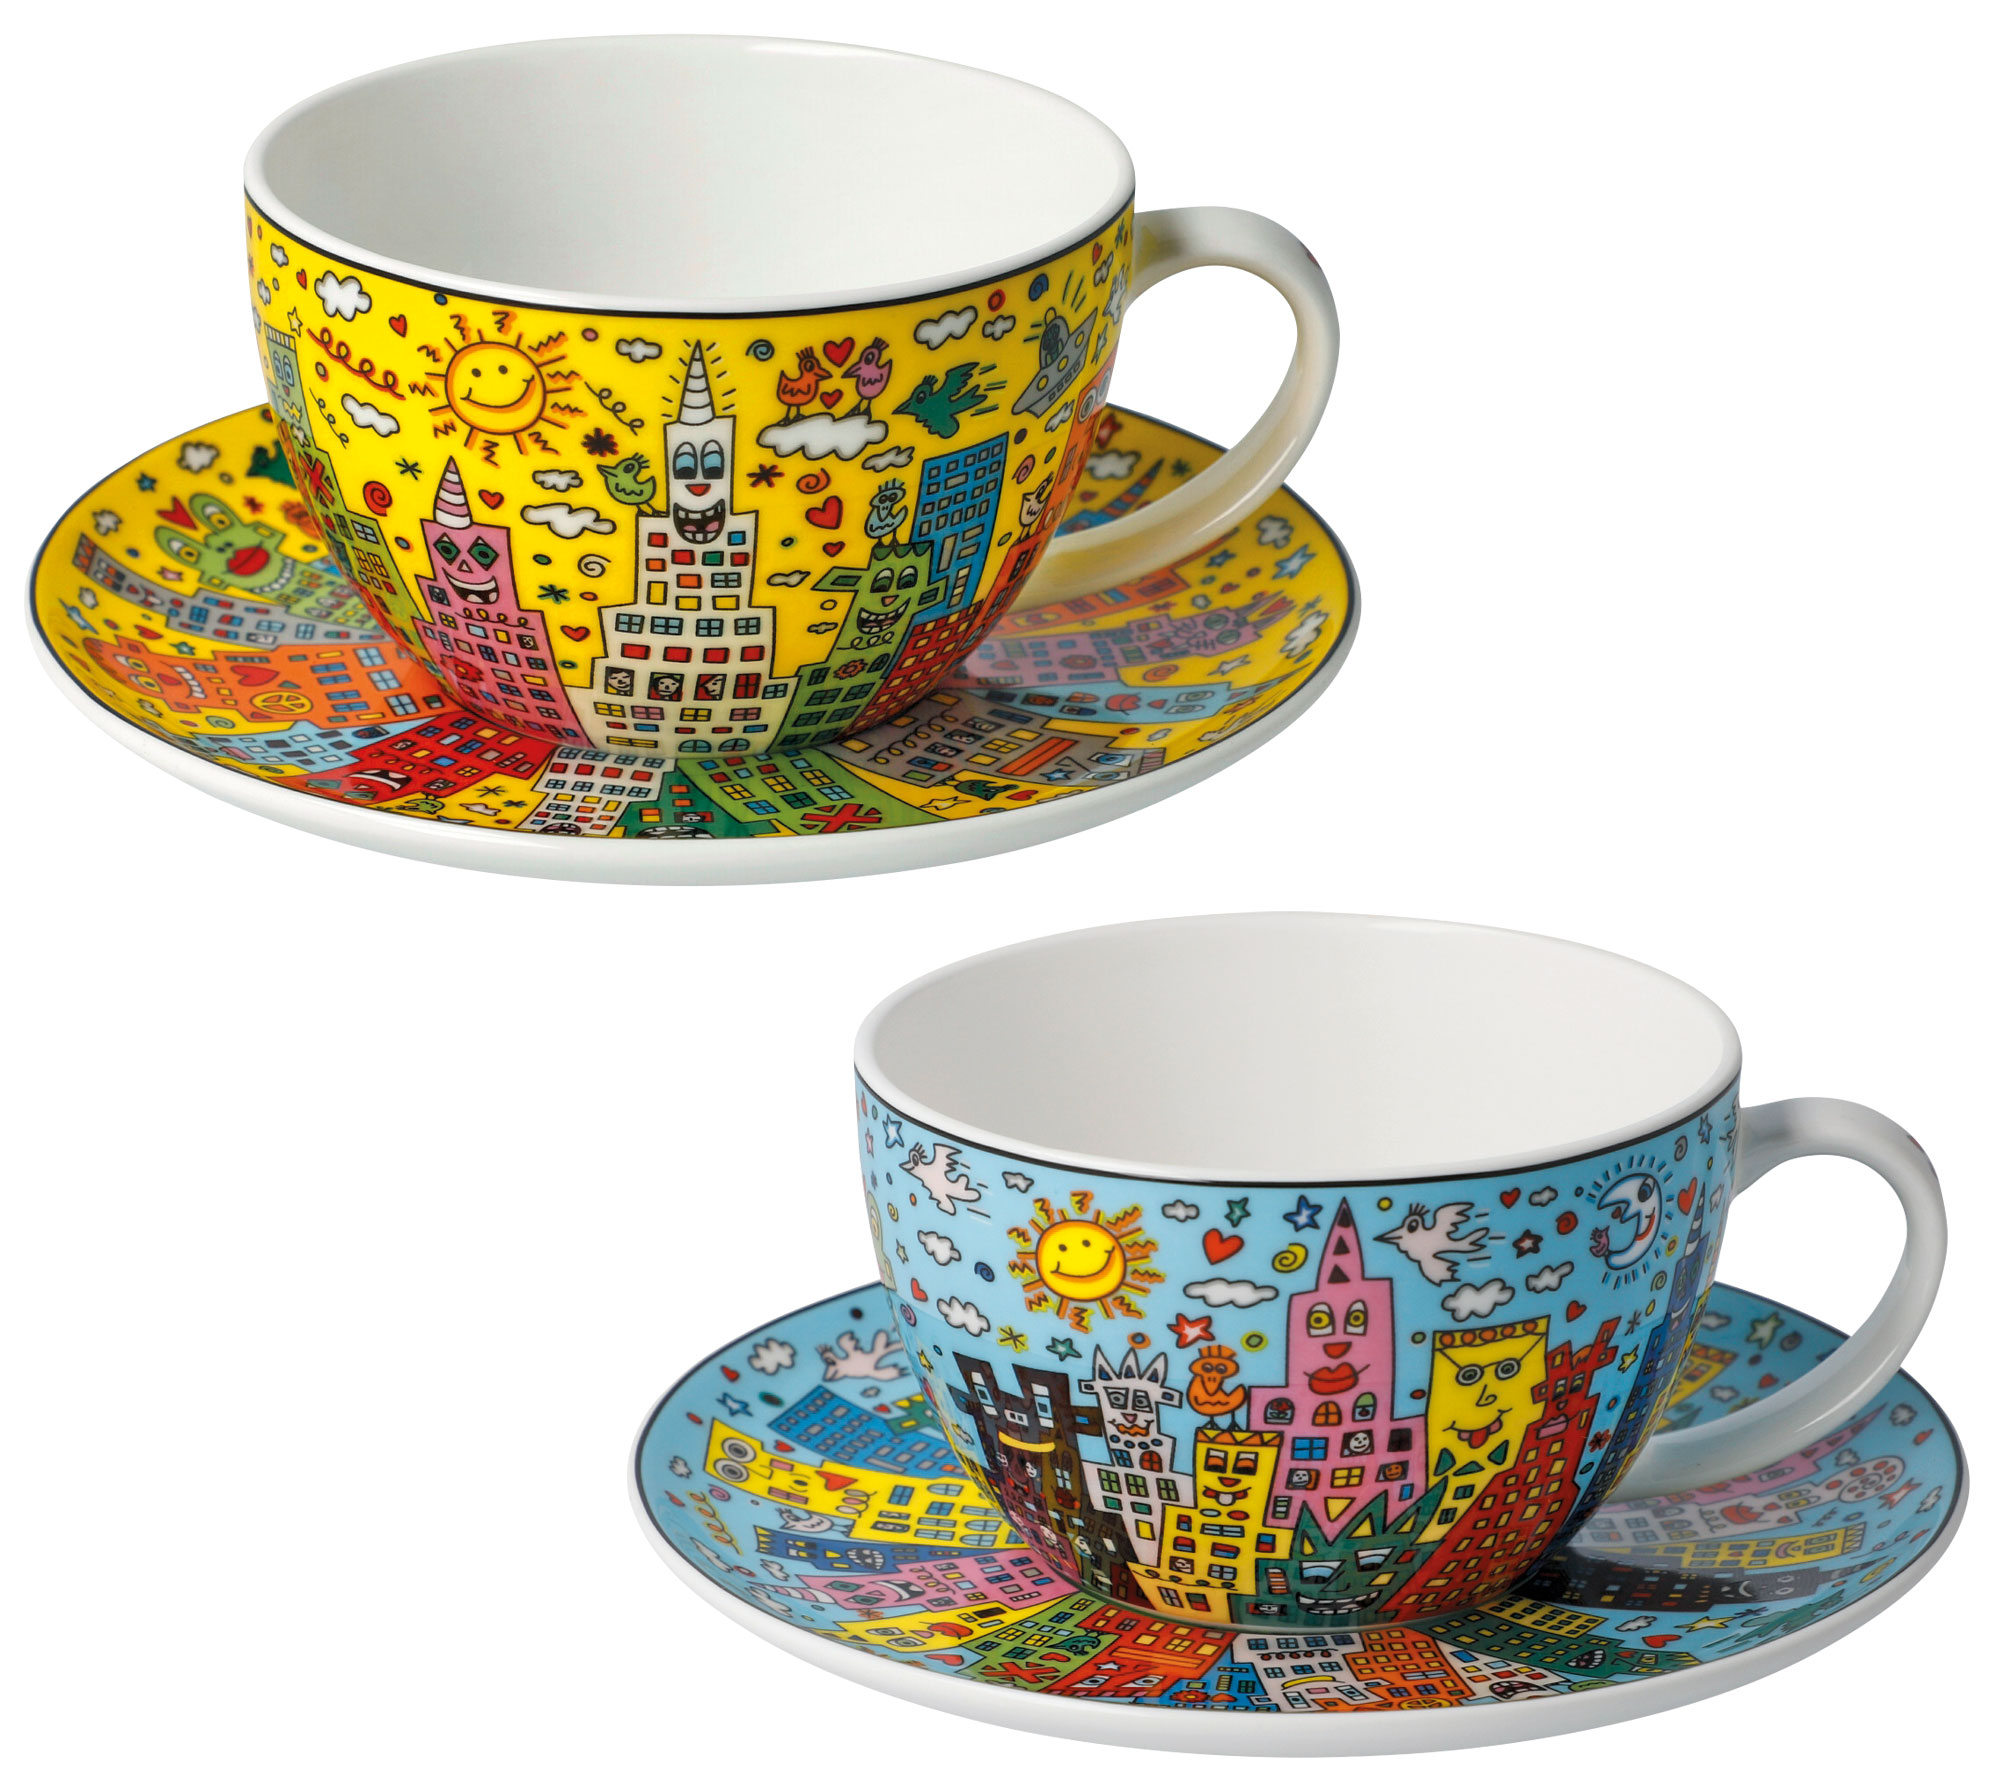 Set of 2 cappuccino cups with artist motifs, porcelain by James Rizzi